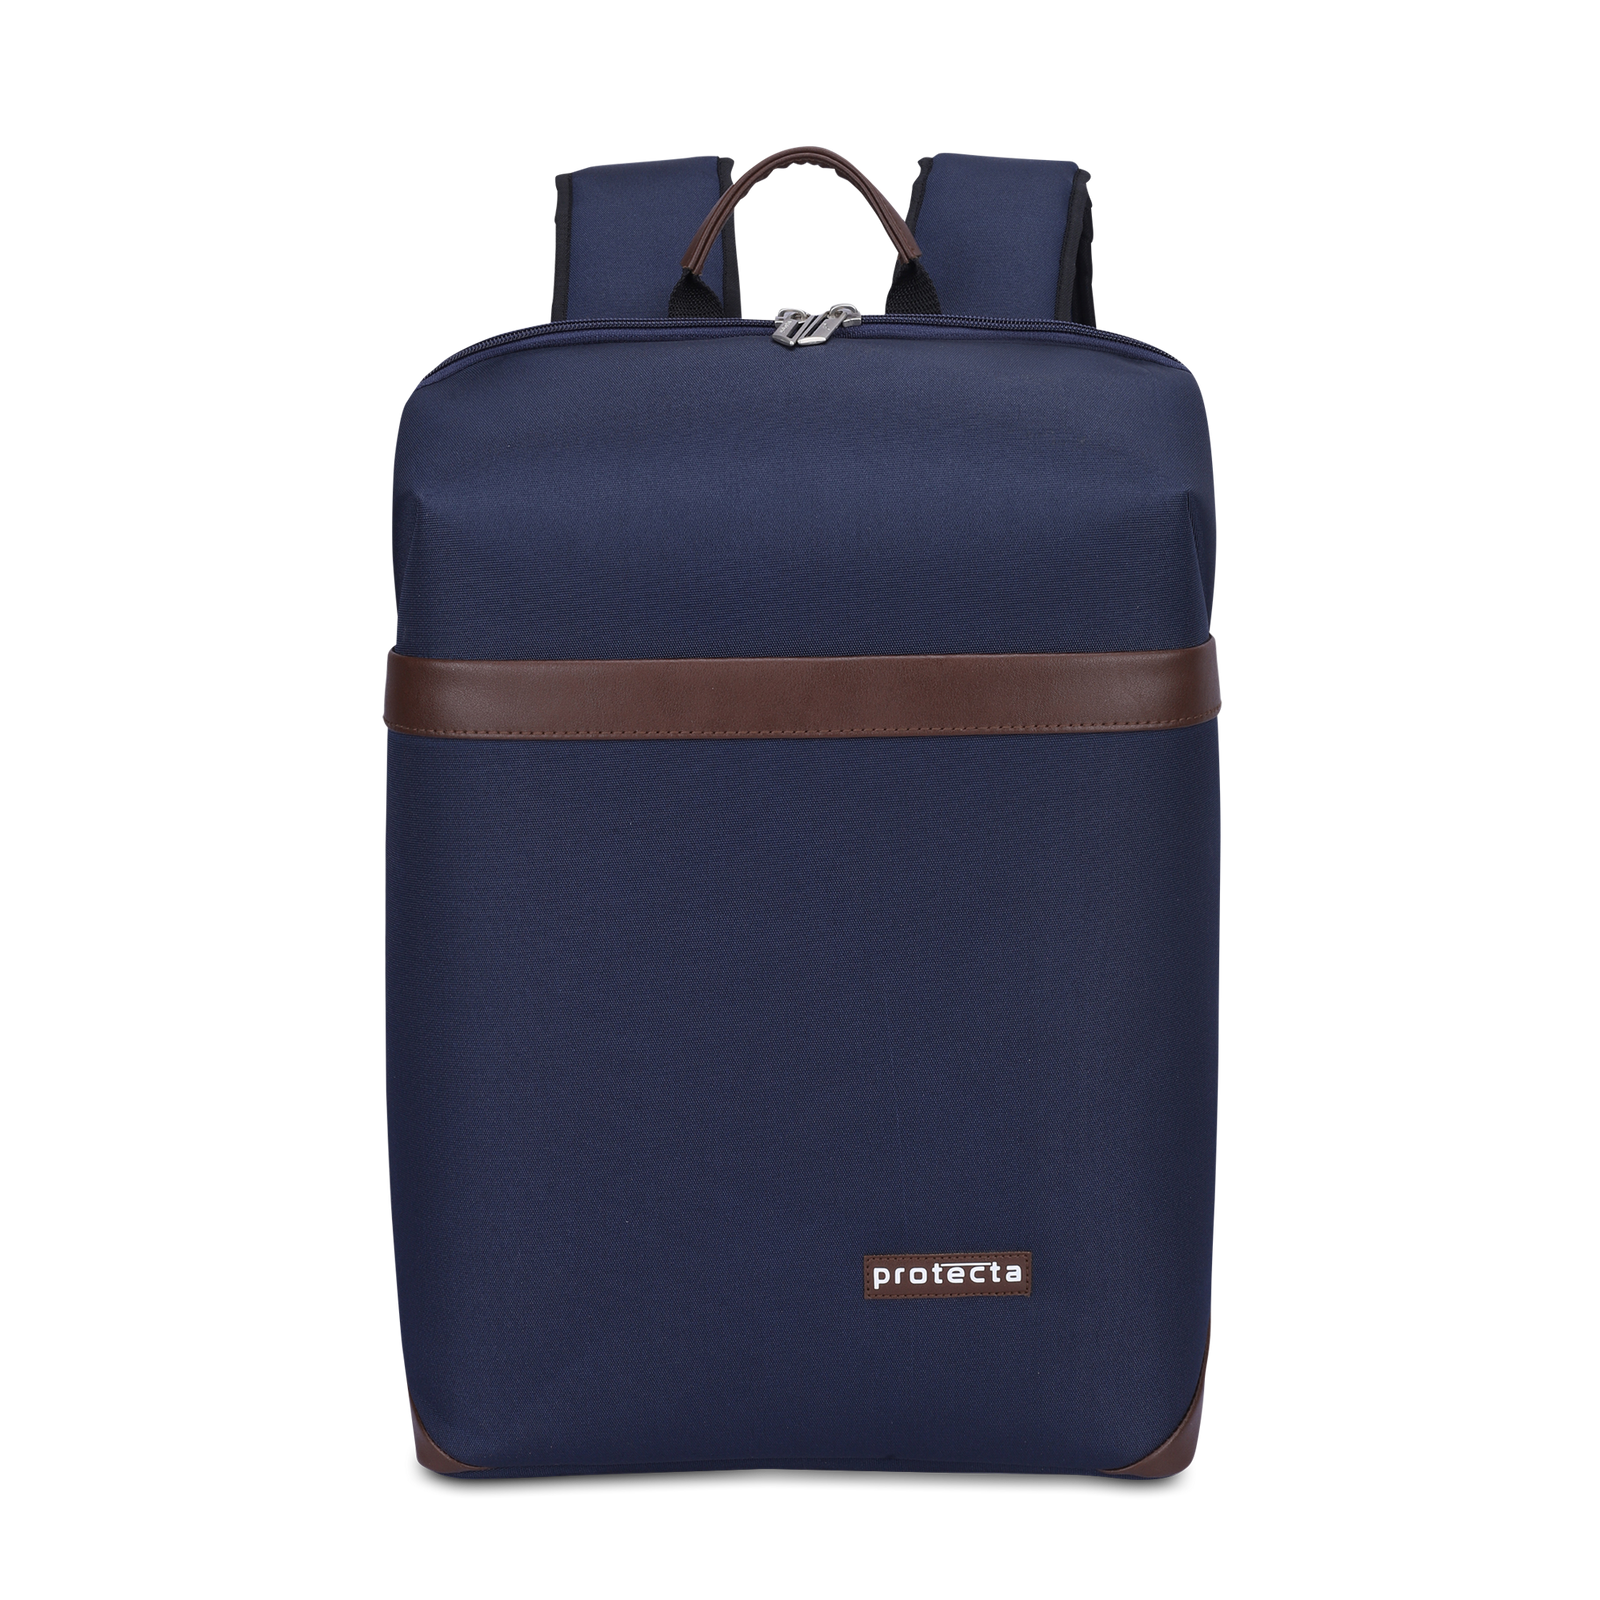 Blue | Protecta Early Lead Anti-Theft Office Laptop Backpack - Main